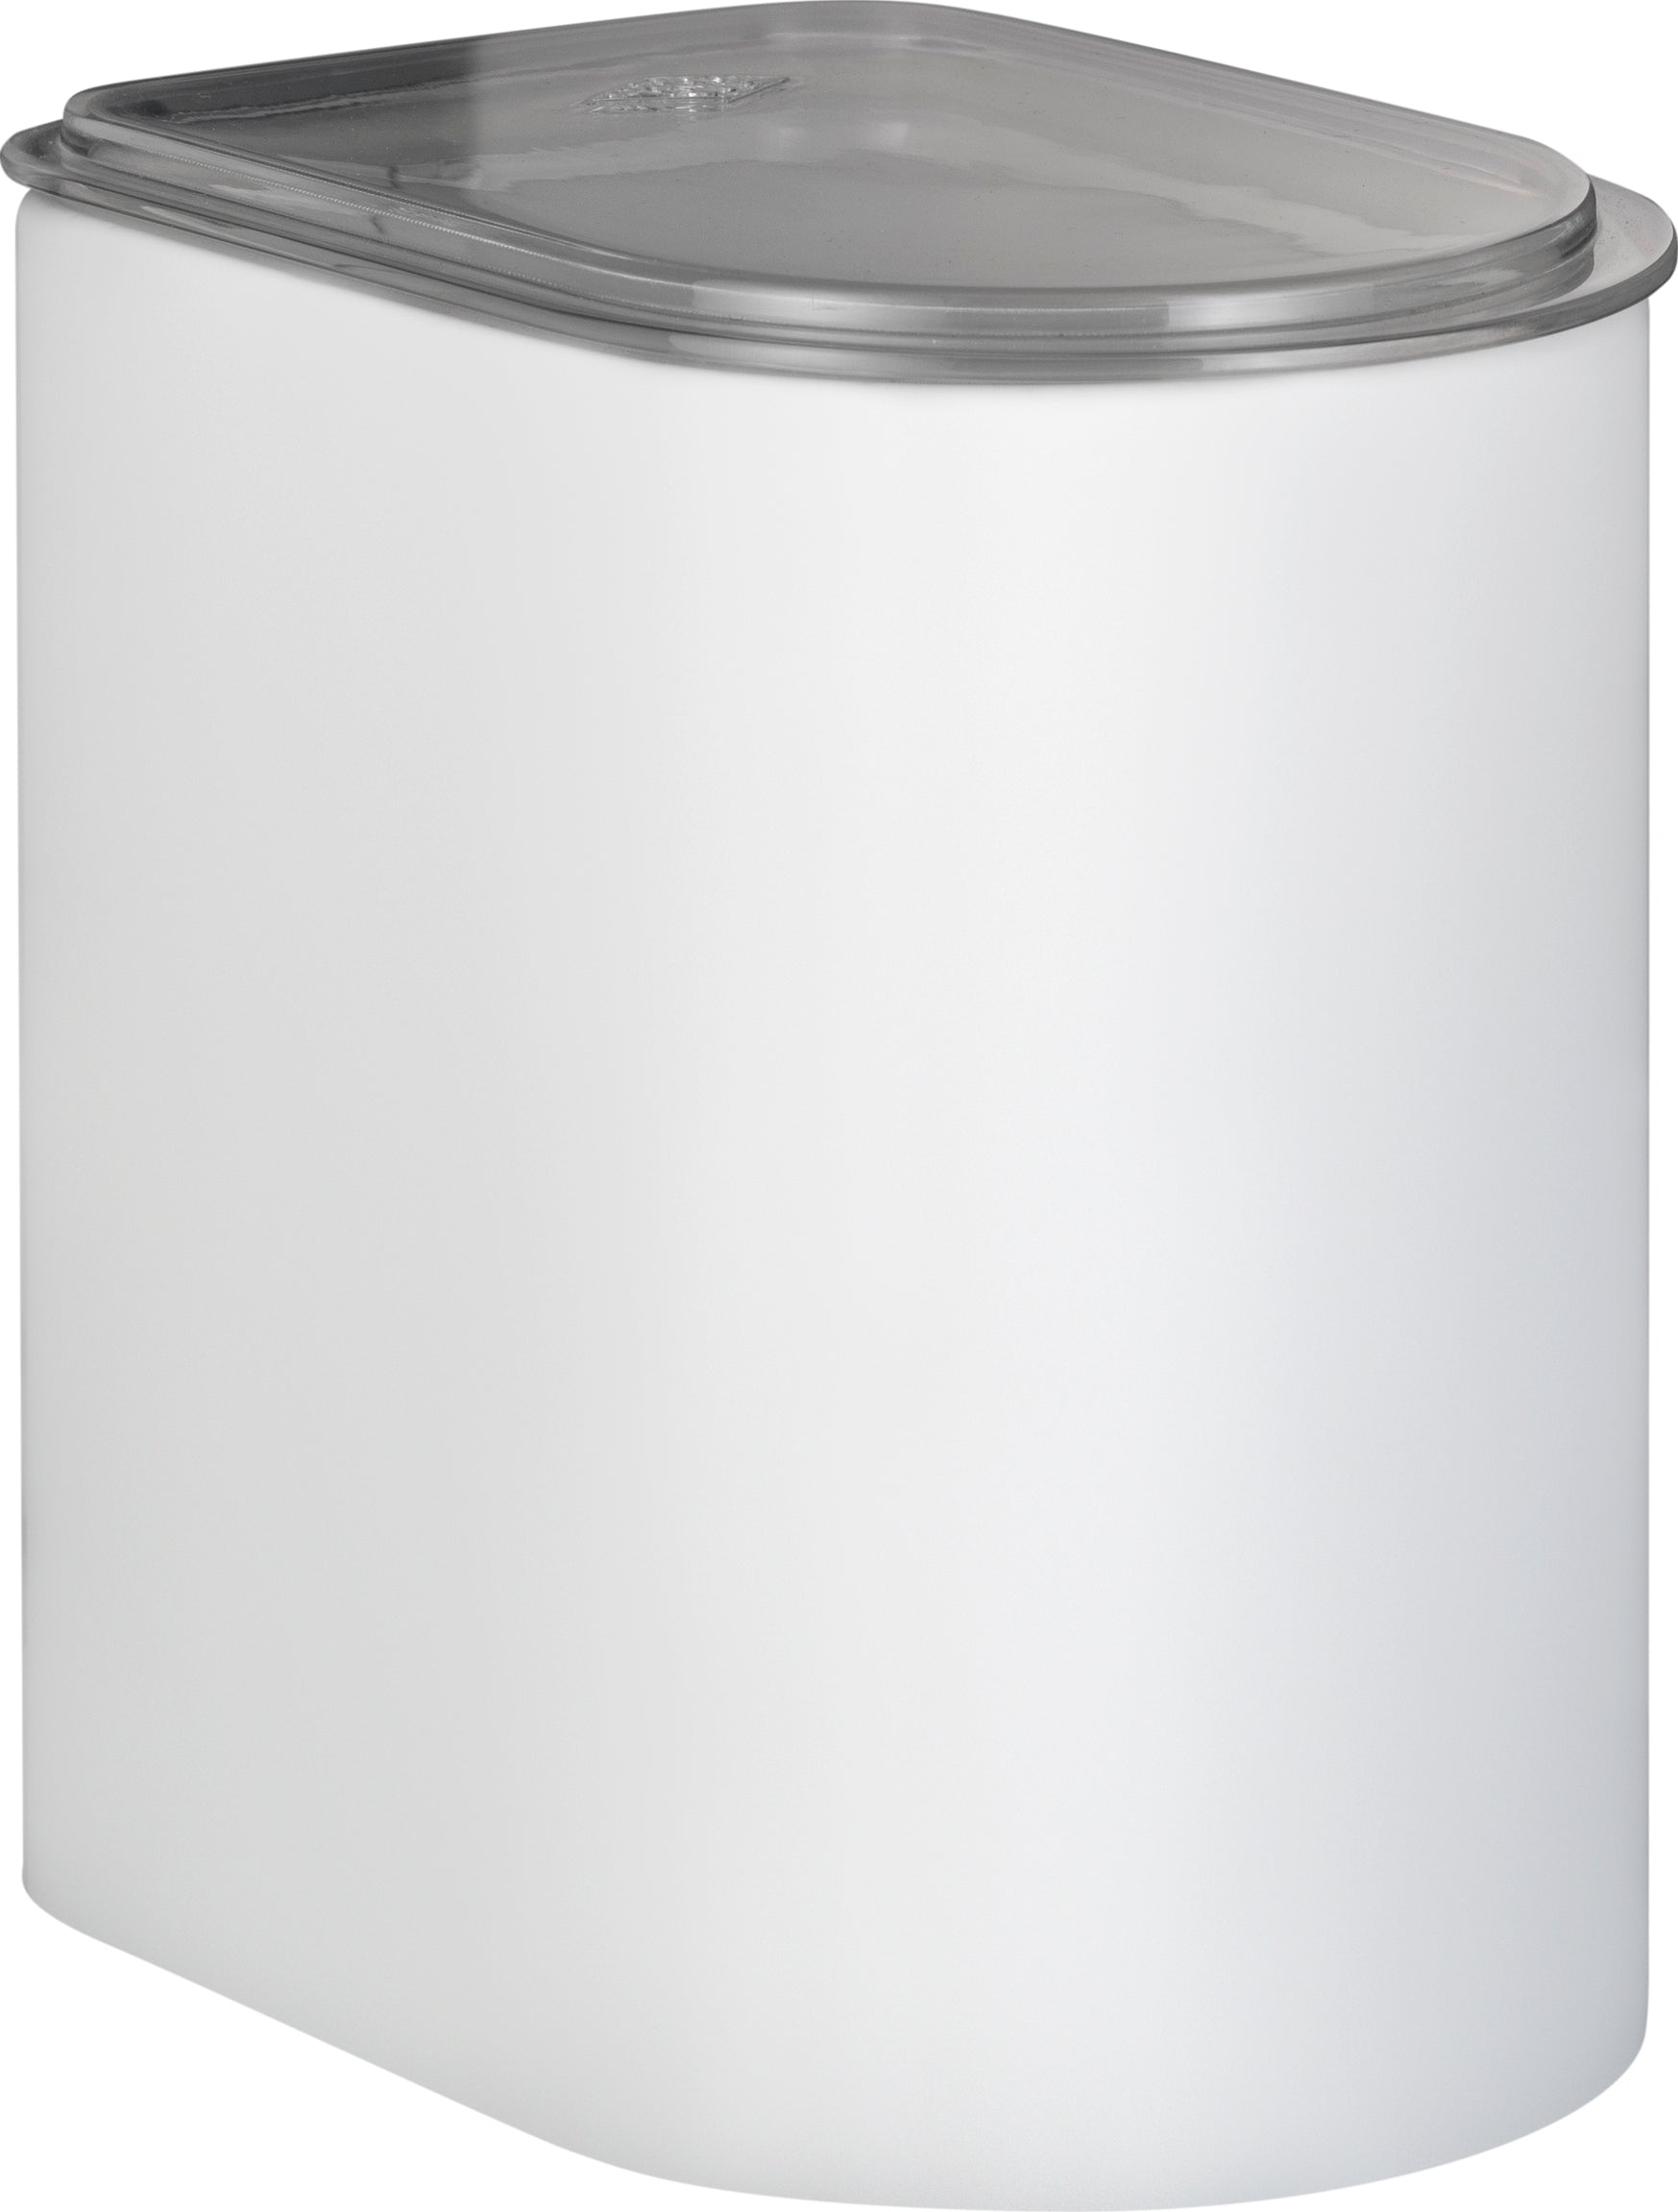 Wesco Canister 2,2 Litre With Acrylic Lid, Matt White